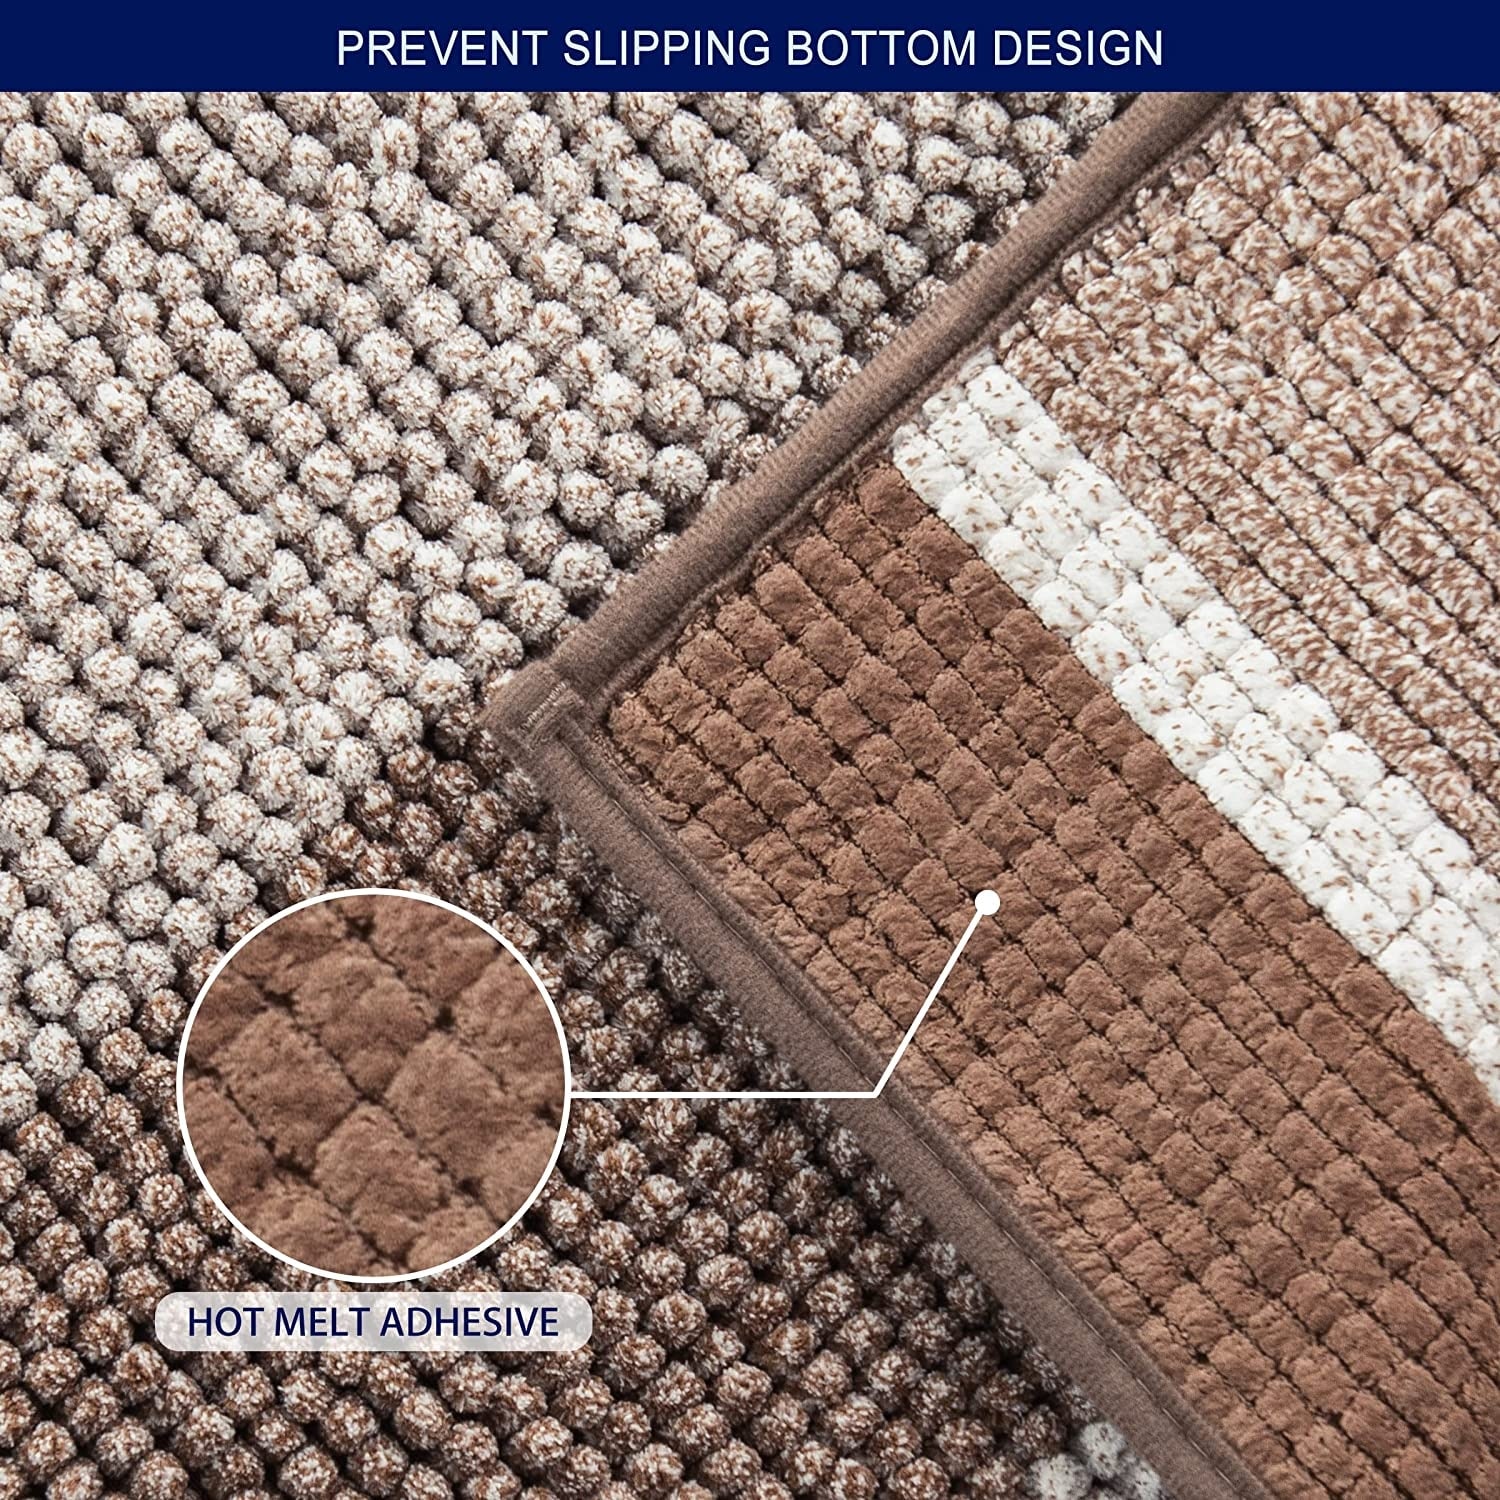 https://ak1.ostkcdn.com/images/products/is/images/direct/08fabcd6a116908696331621f8df3d23dc92283b/Subrtex-Rugs-Chenille-Gradient-Stripe-Pattern-Soft-Plush-Bath-Rug-Shower-Water-Absorbent-Mat.jpg